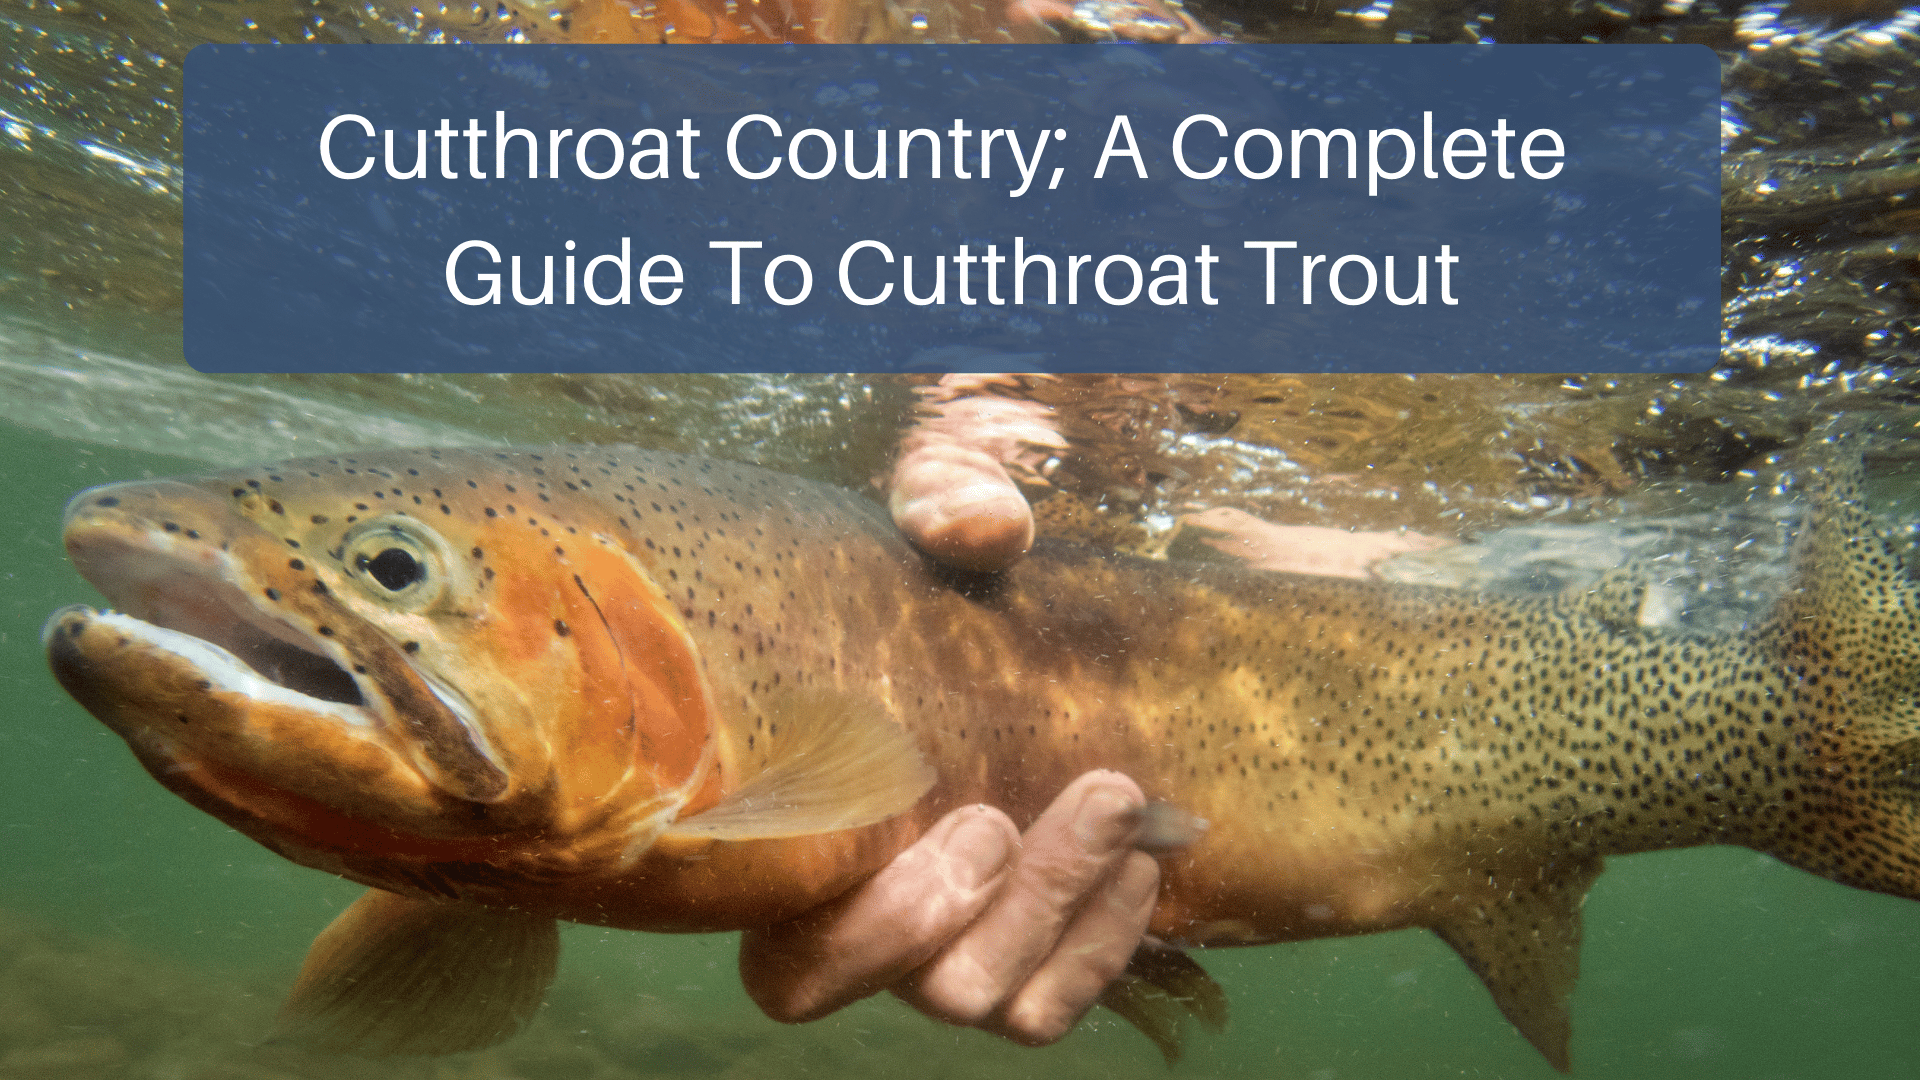 Cutthroat Country; A Complete Guide To Cutthroat Trout